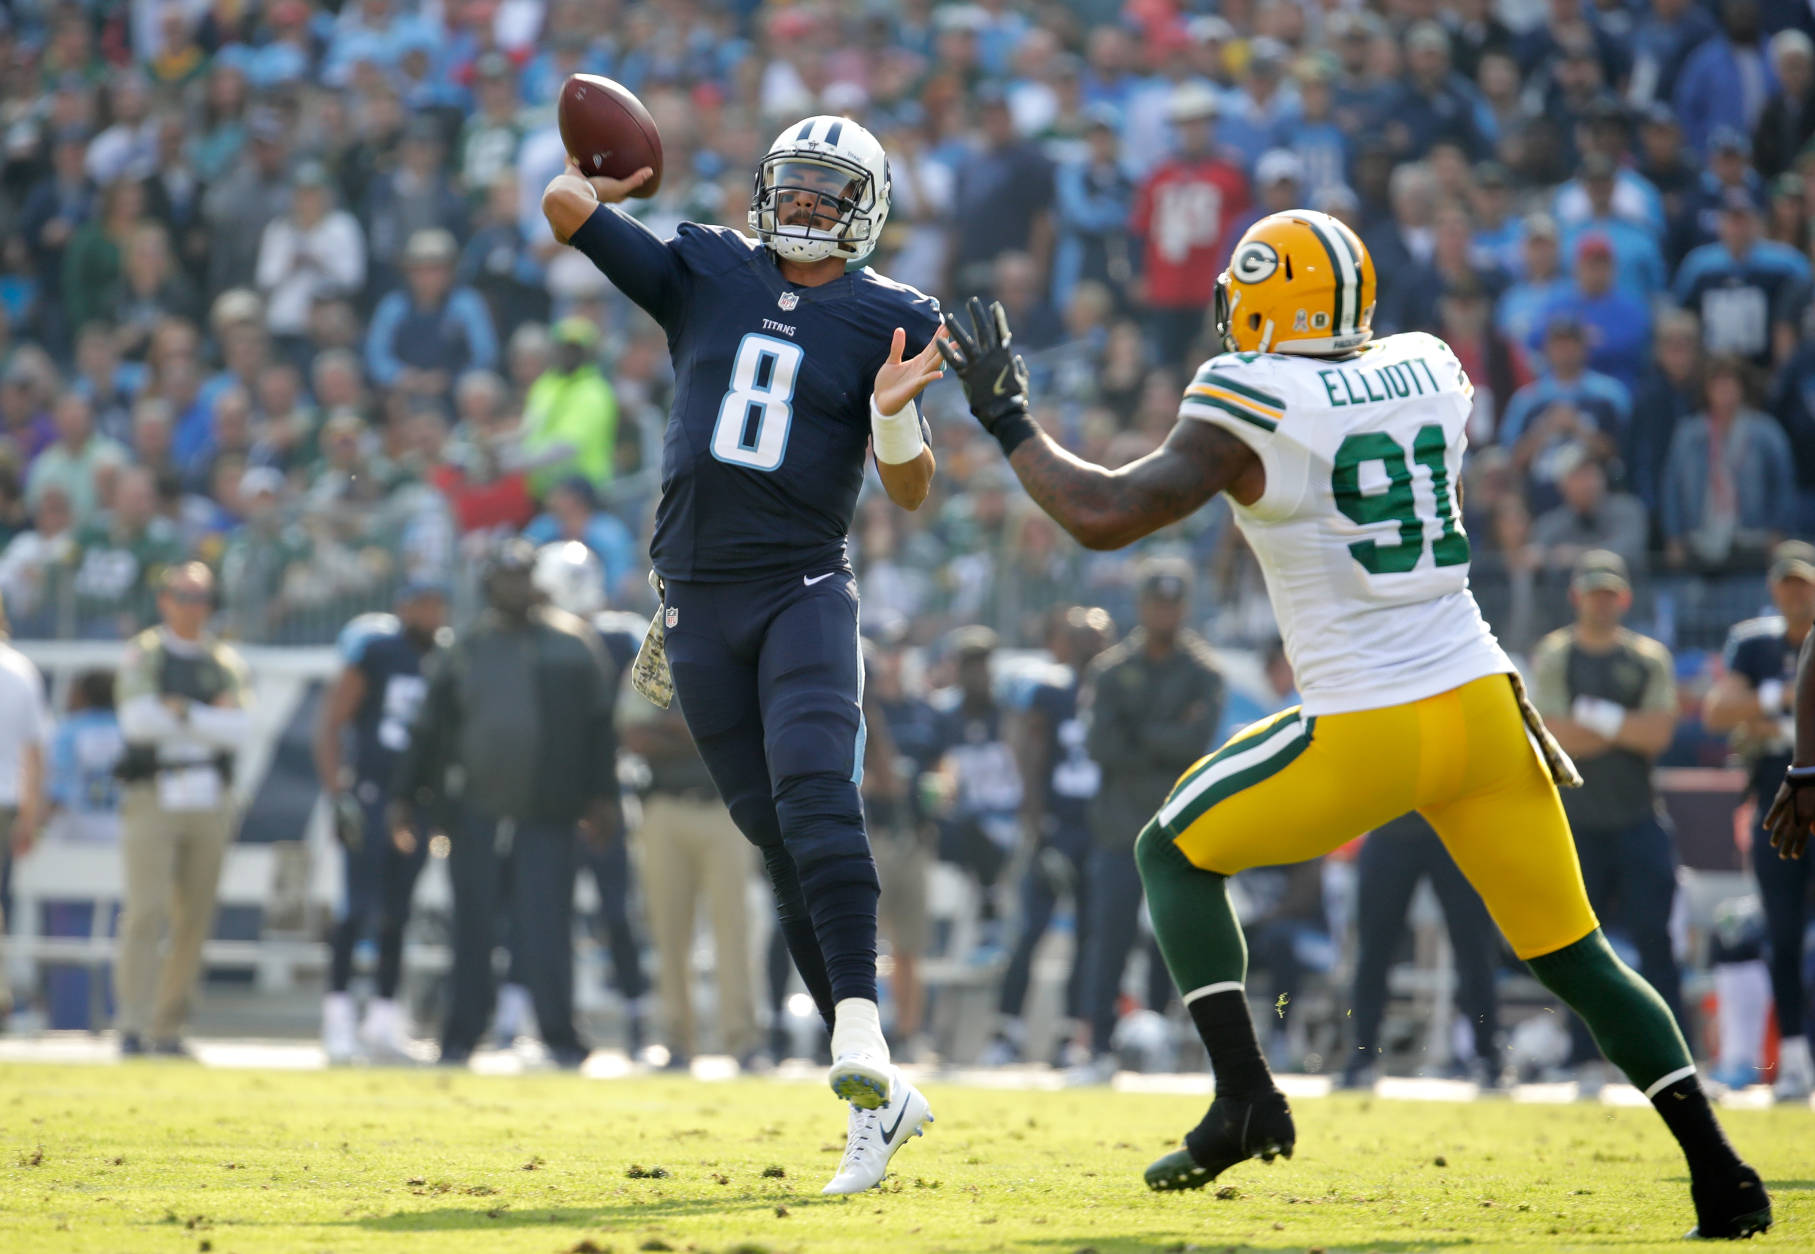 NASHVILLE, TN - NOVEMBER 13:  Marcus Mariota #8 of the Tennessee Titans throws a pass during the game against the Green Bay Packers at Nissan Stadium on November 13, 2016 in Nashville, Tennessee.  (Photo by Andy Lyons/Getty Images)